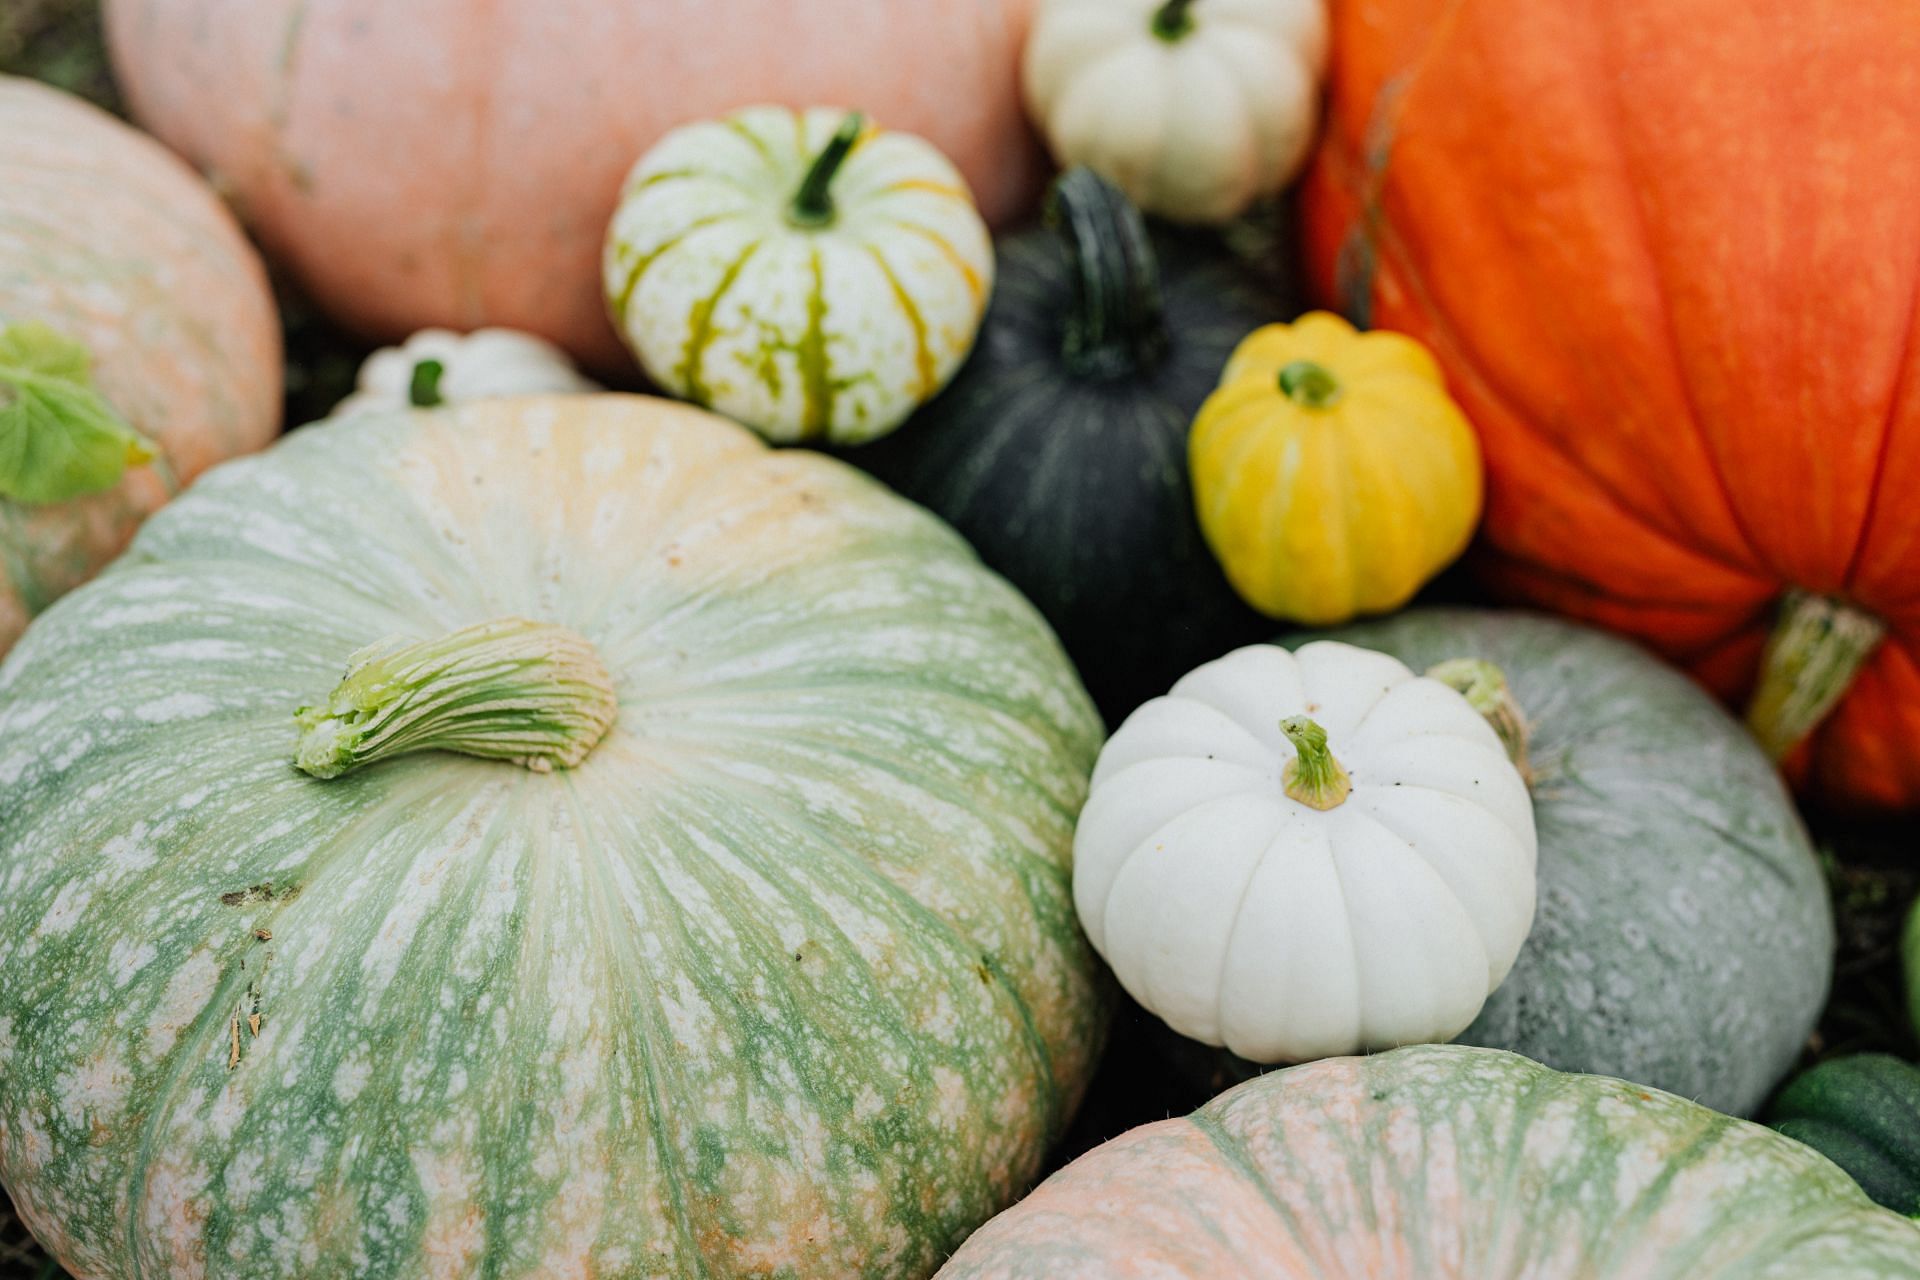 Pumpkin as one of the worst vegetables for weight loss (Image sourced by Pexels / Photo by karolina)